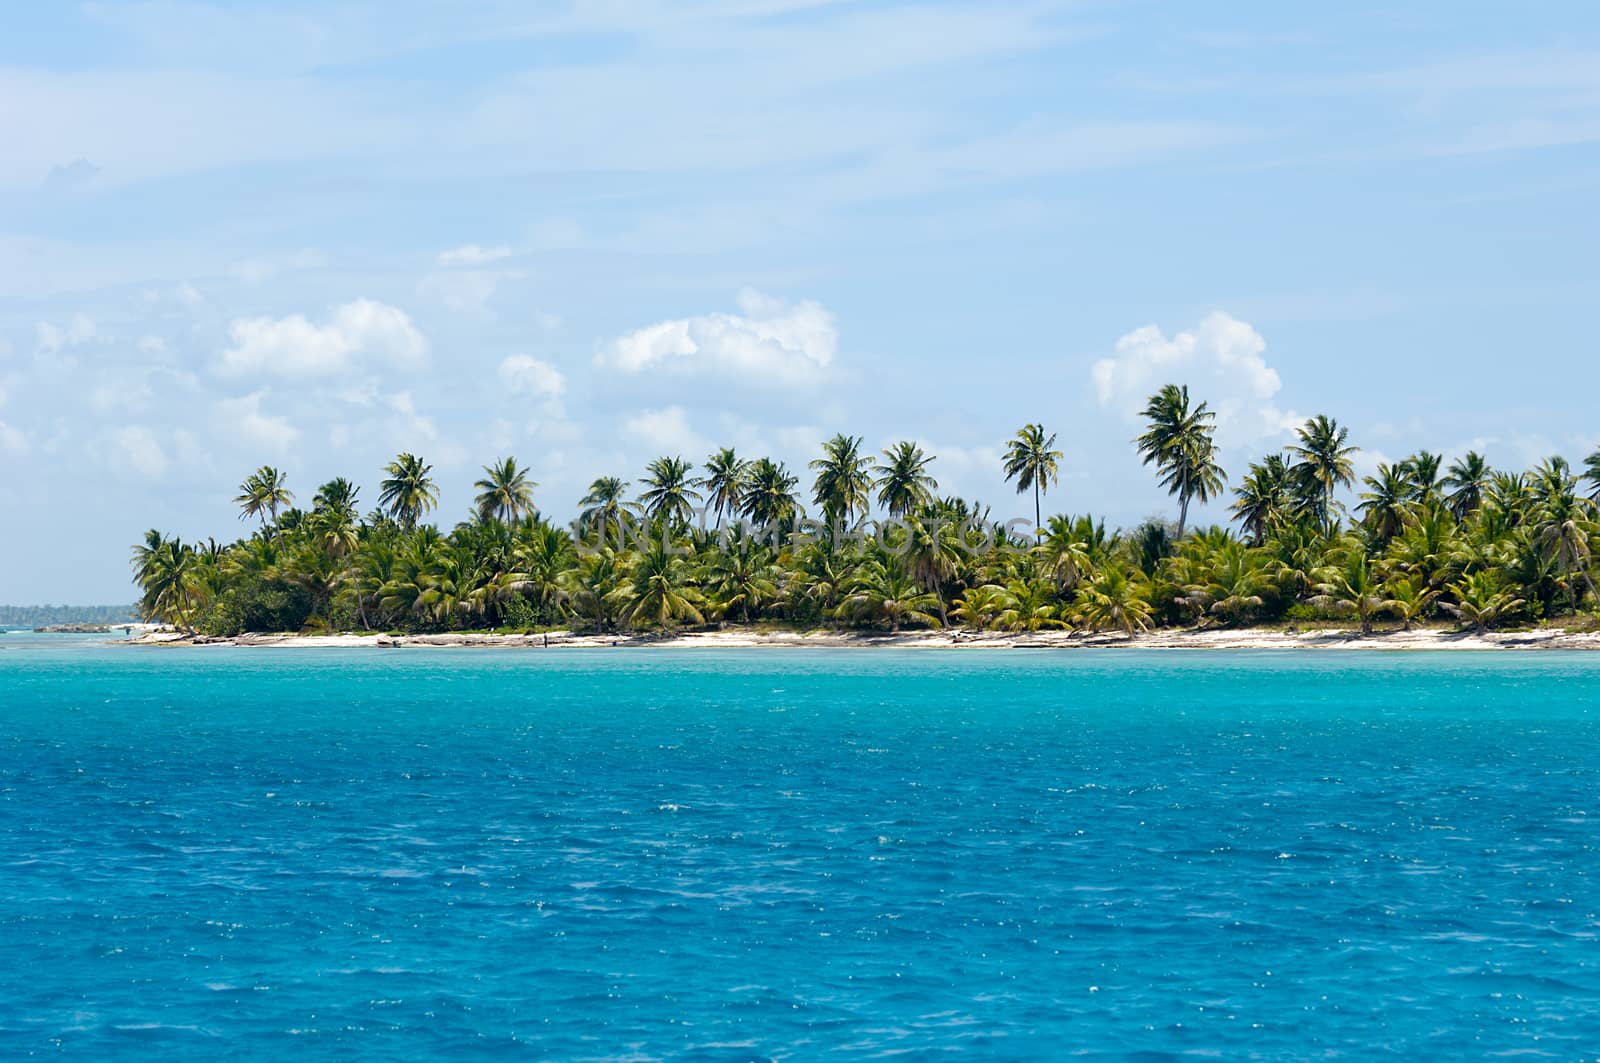 Empty Caribbean island with a nice beach and green palms. The picture of the beach is taken from a boat on sea.